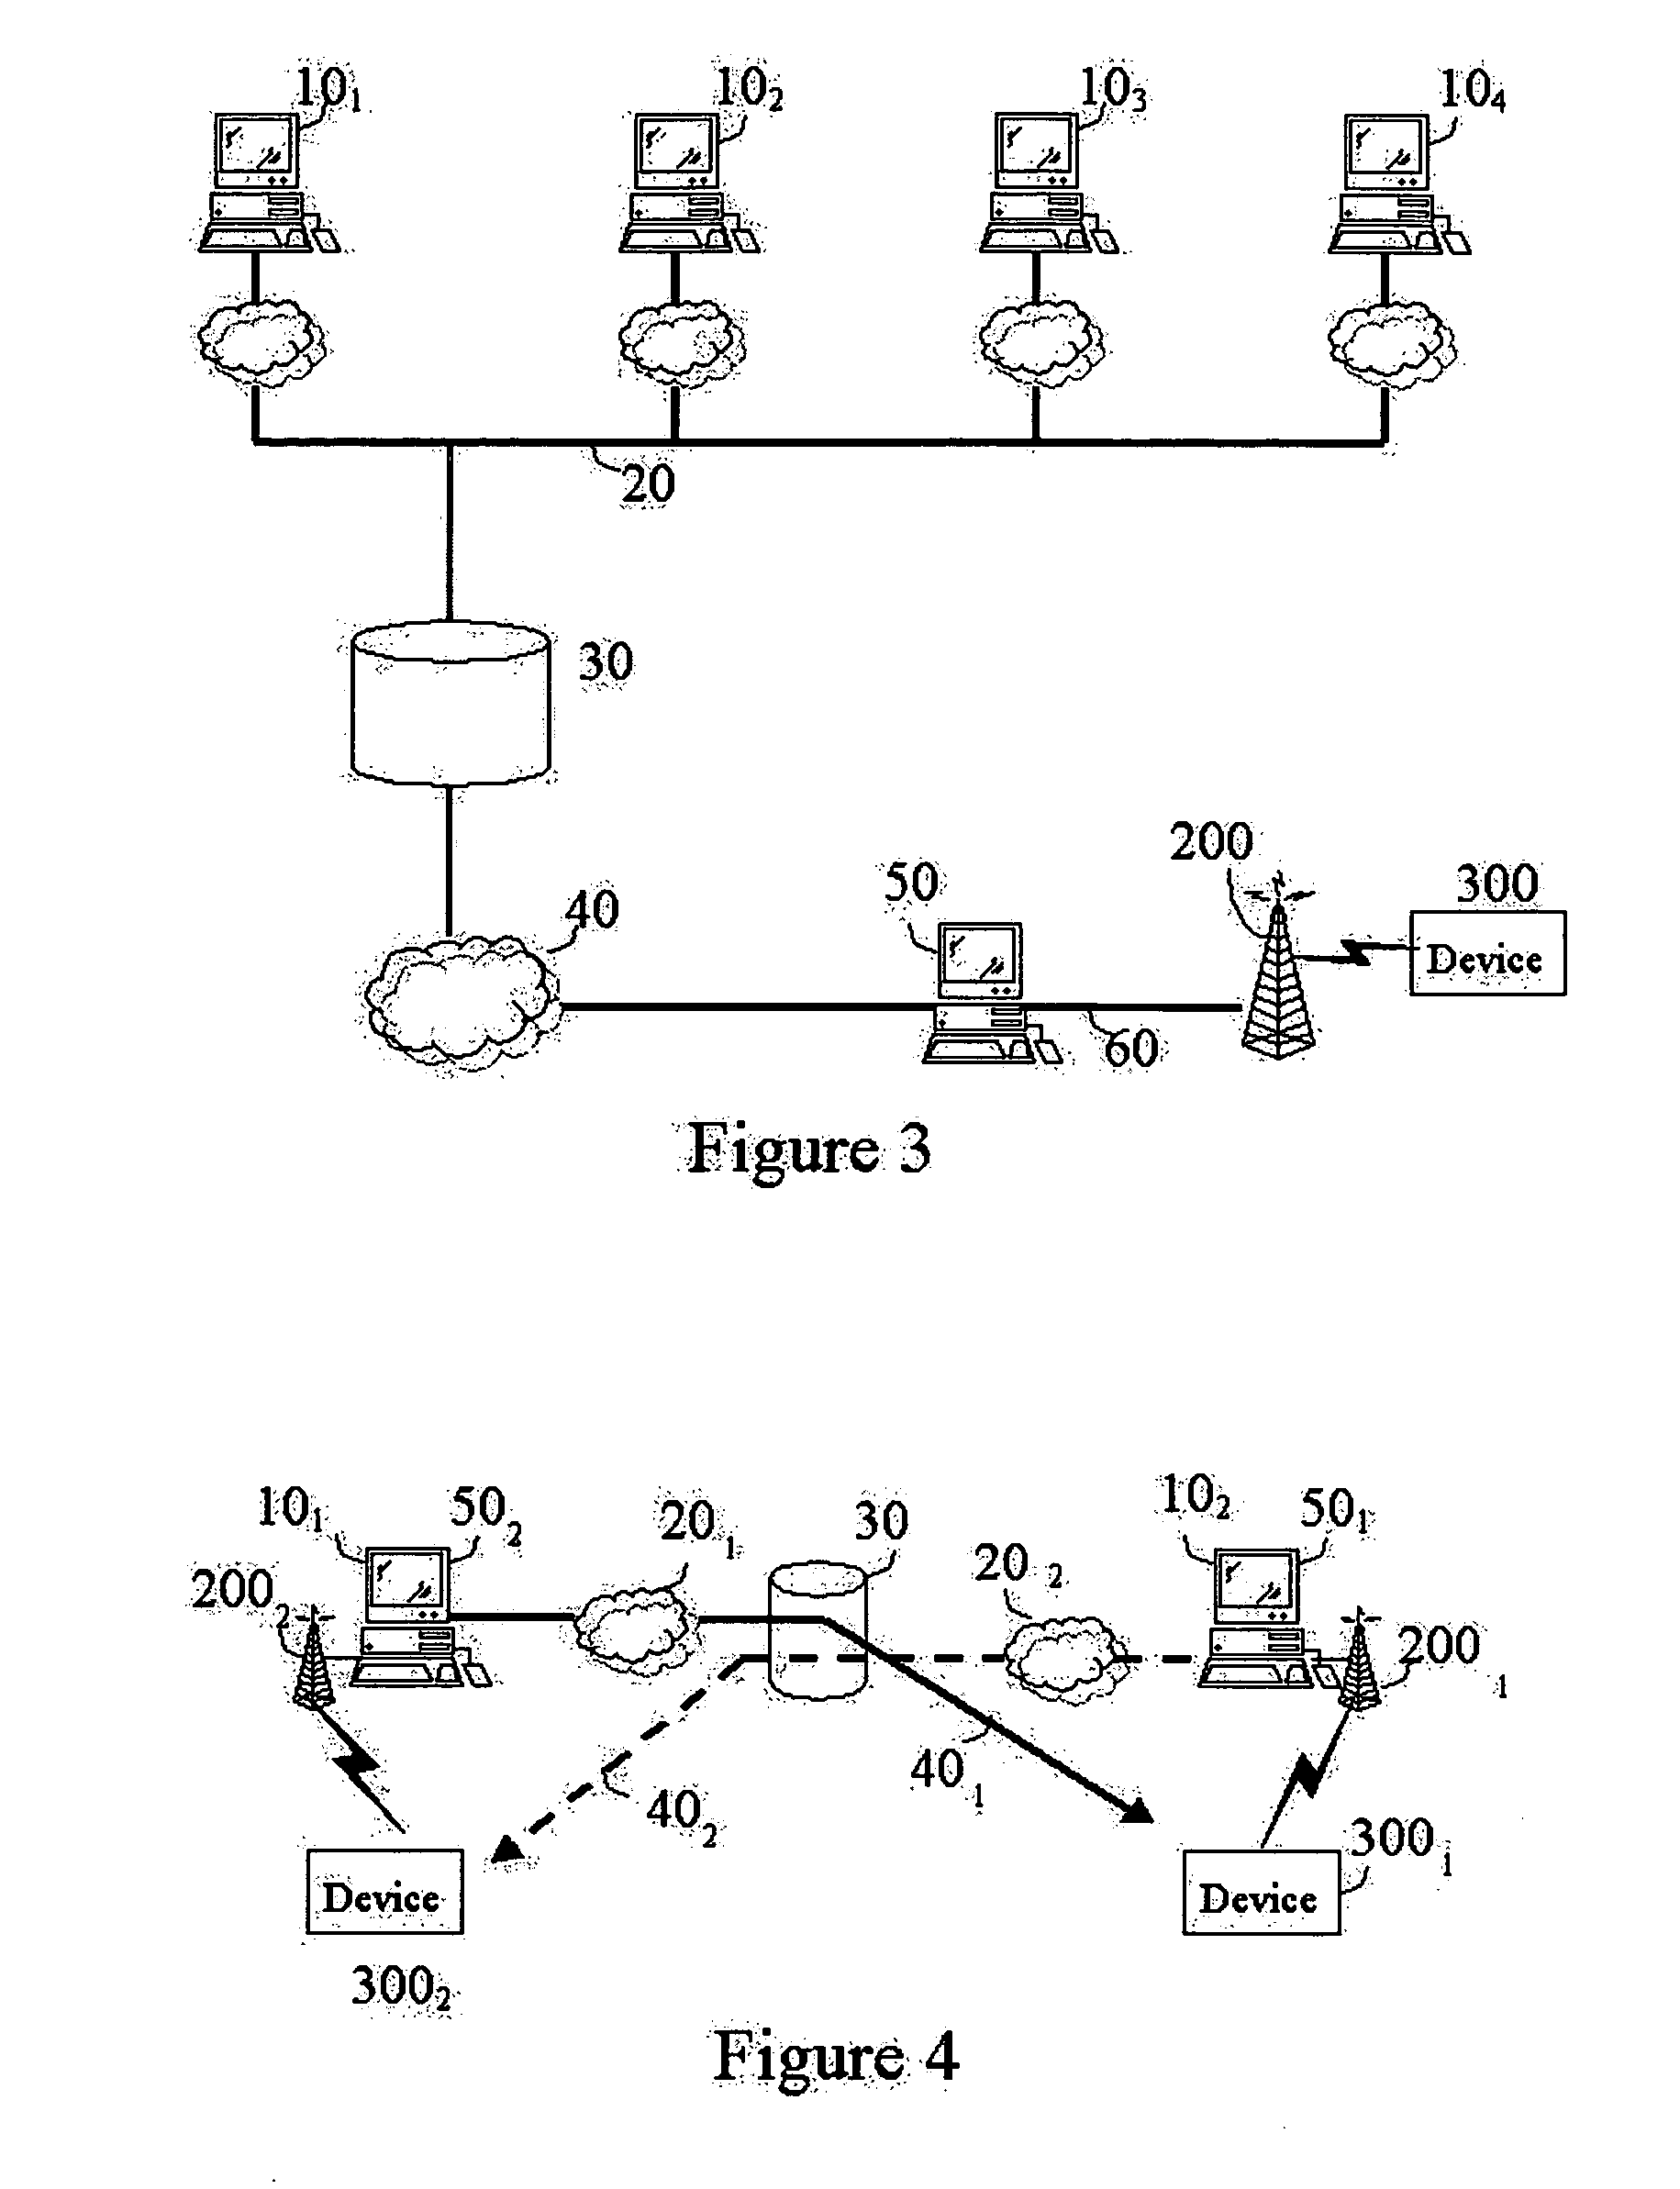 Remote control of a wireless device using a web browser